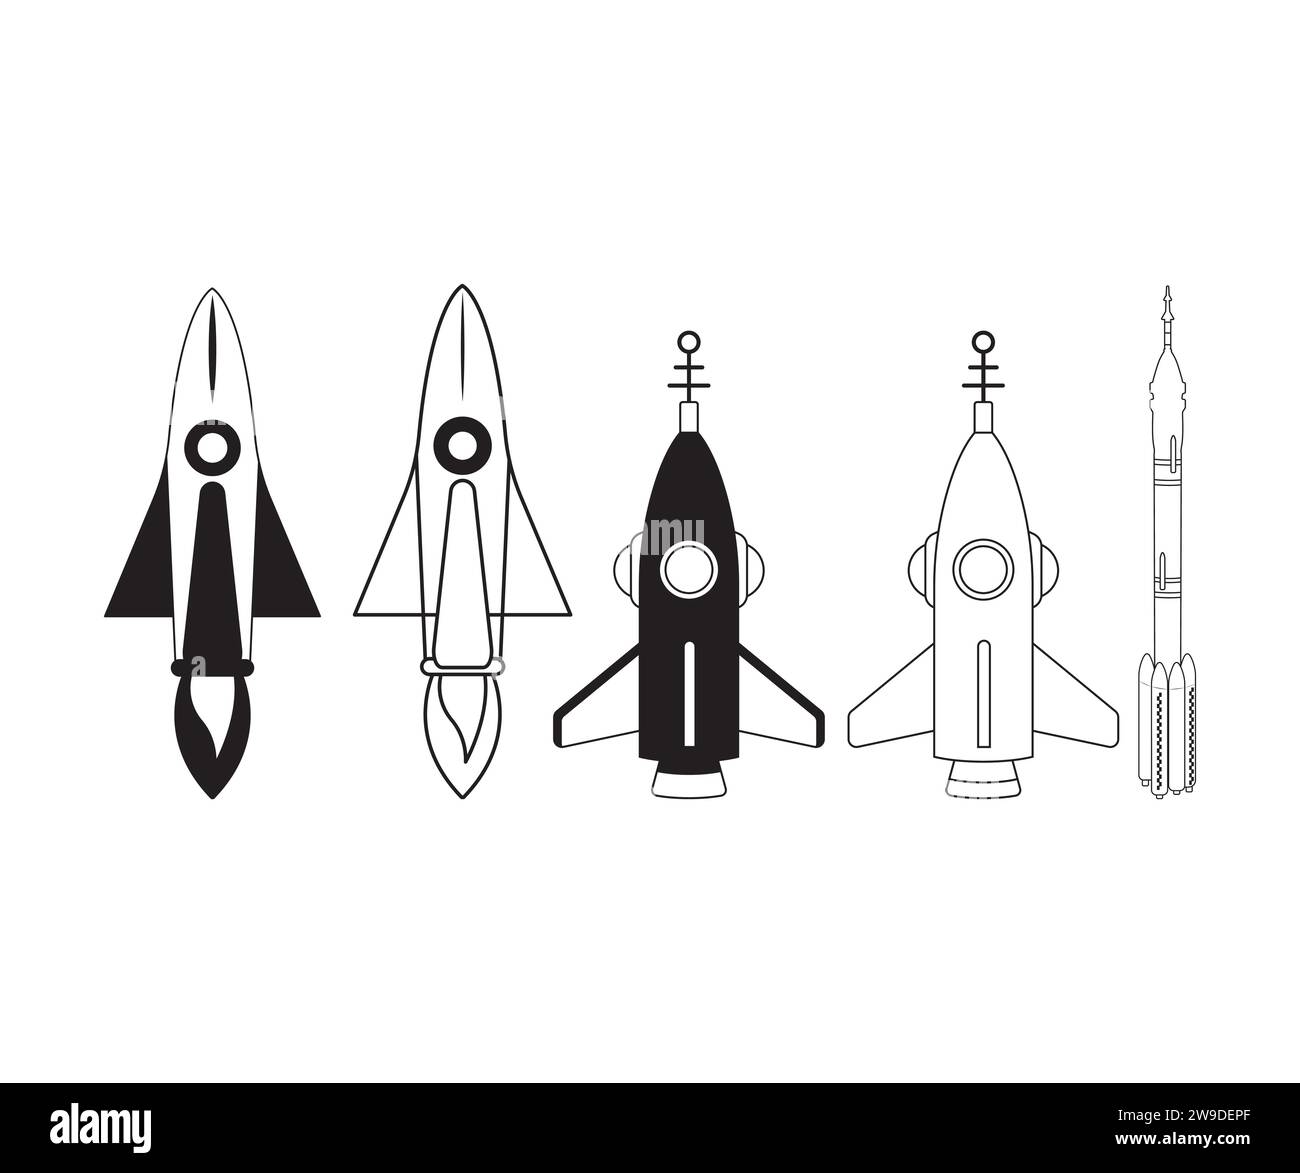 Space ship illustration Black and White Stock Photos & Images - Alamy